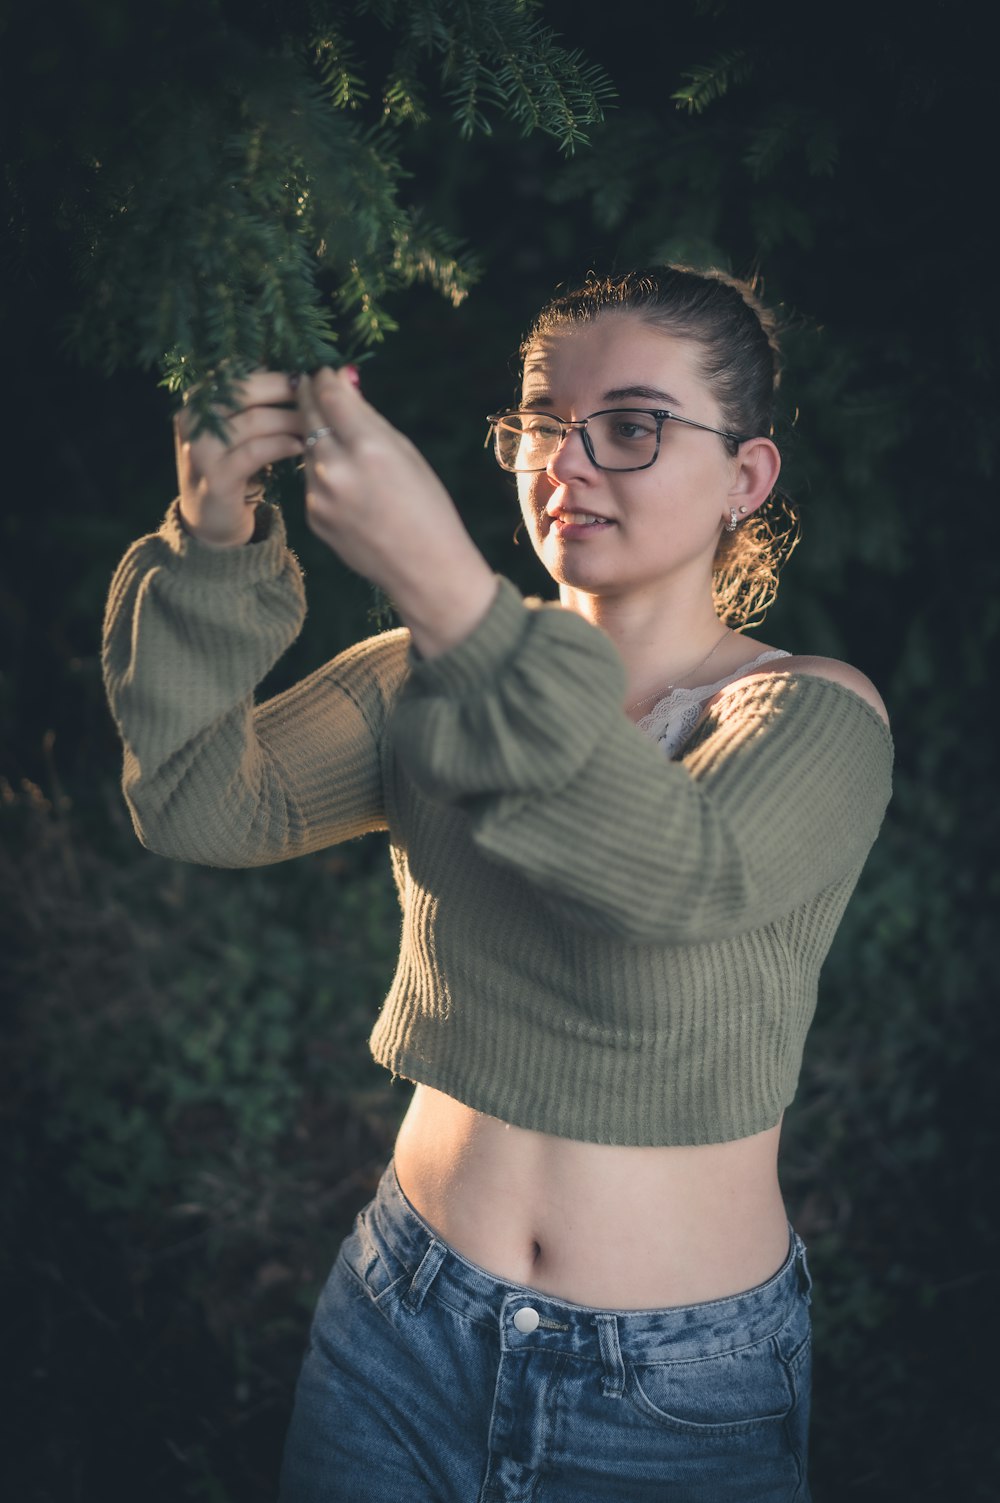 a woman wearing glasses is holding a tree branch